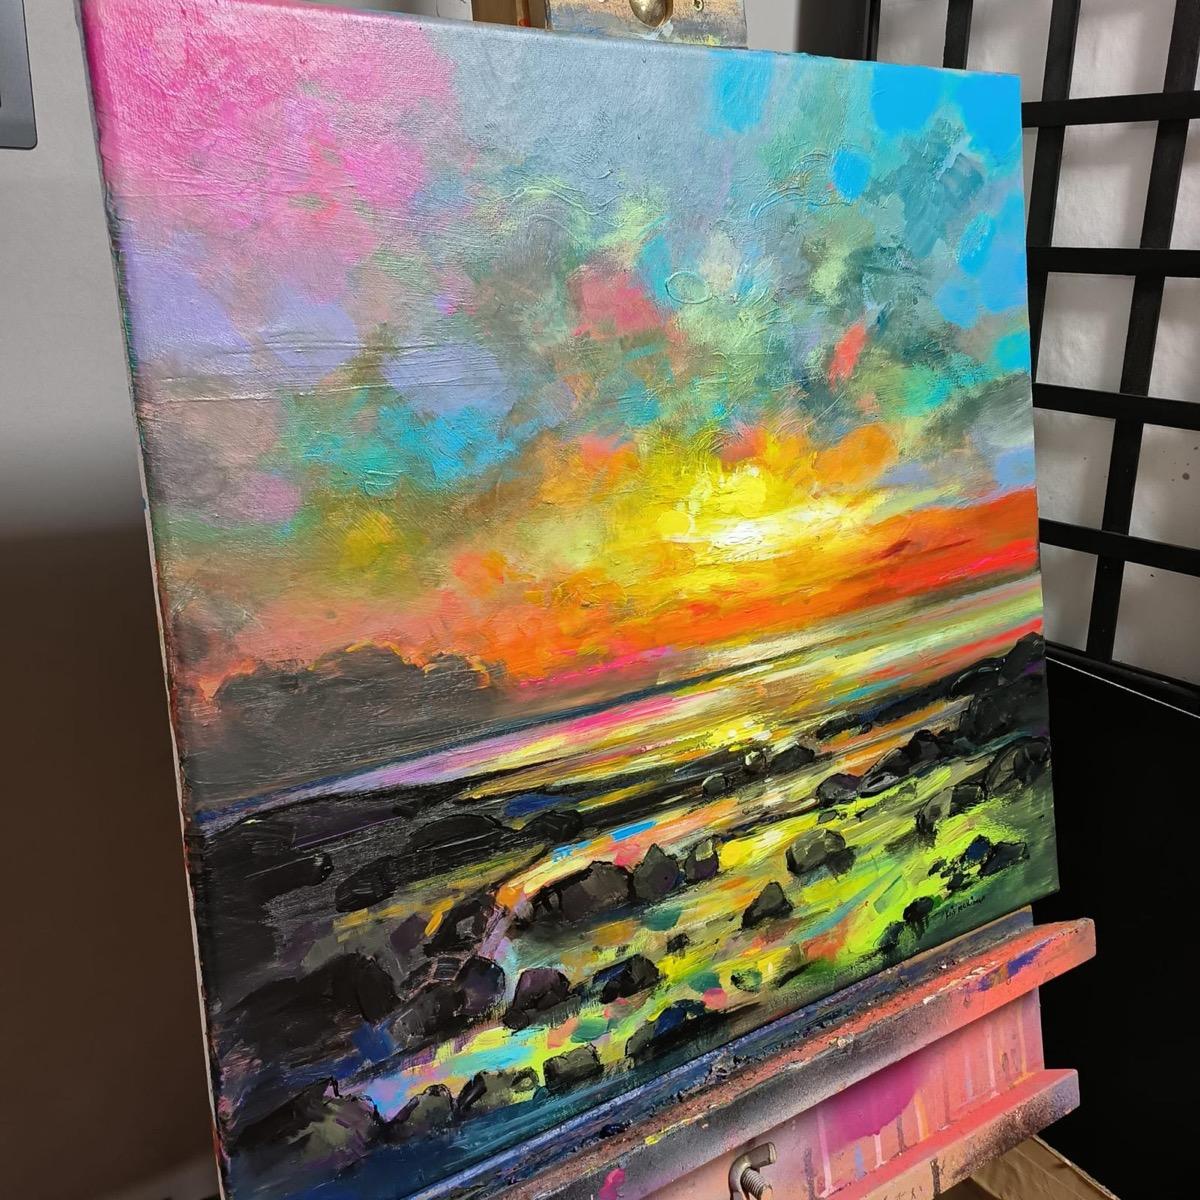 Original painting by Kris McKinnon. A rocky seaview showing a display of vibrant pastel tones.

ADDITIONAL INFORMATION:
Original painting
Acrylic on canvas
Sold unframed
Complete size of unframed work: 50 H x 50 W x 2 D cm (19.69 x 19.69 x 0.79